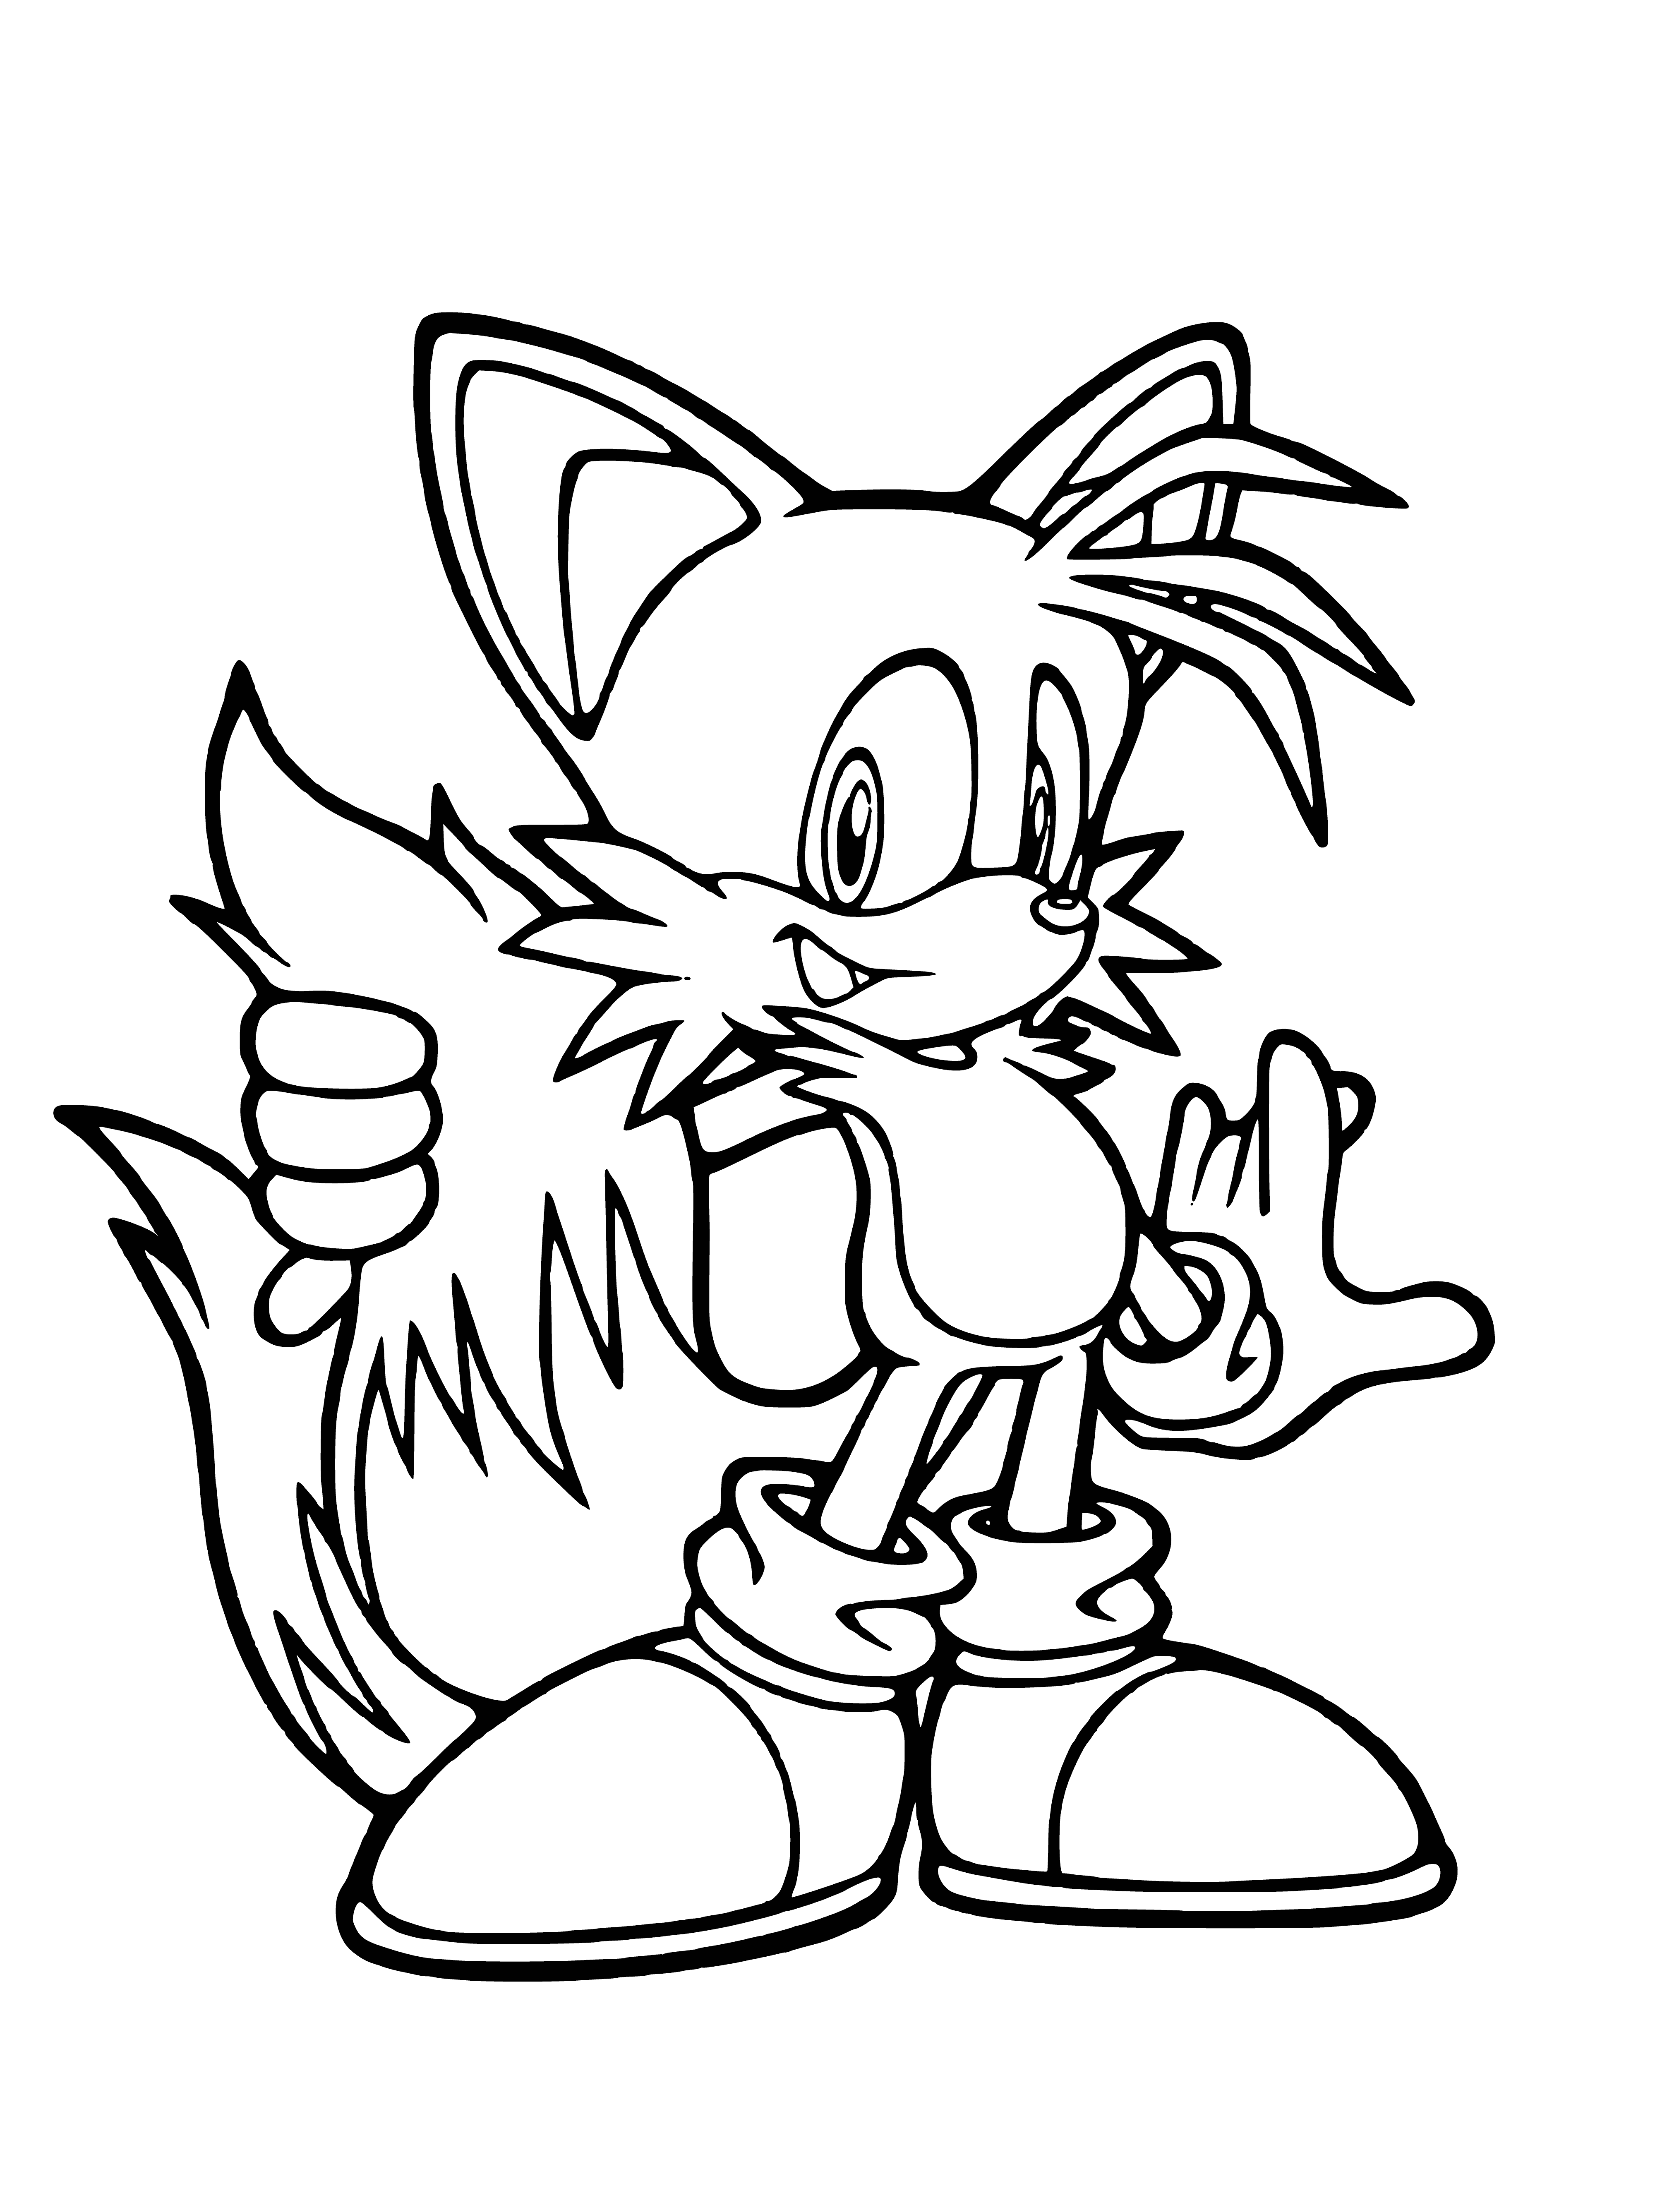 coloring page: Sonic & boy smile as they stand together, a blue hedgehog & a kid with brown hair.